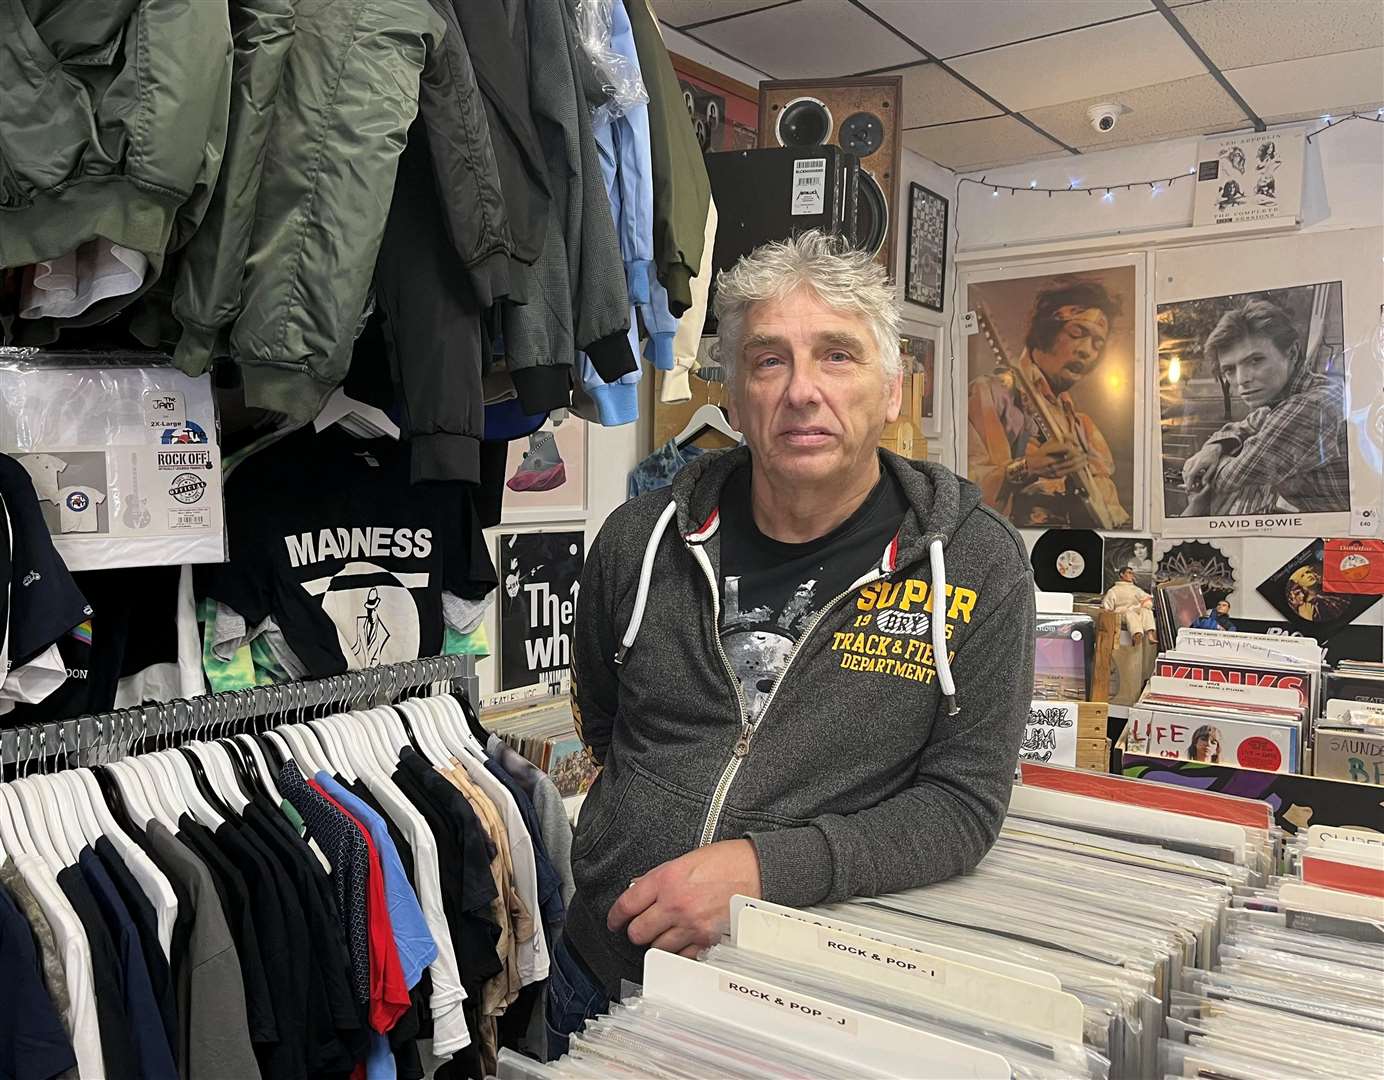 Vince Monticelli at The Record Store, which is near Wilko, says it is disappointing news